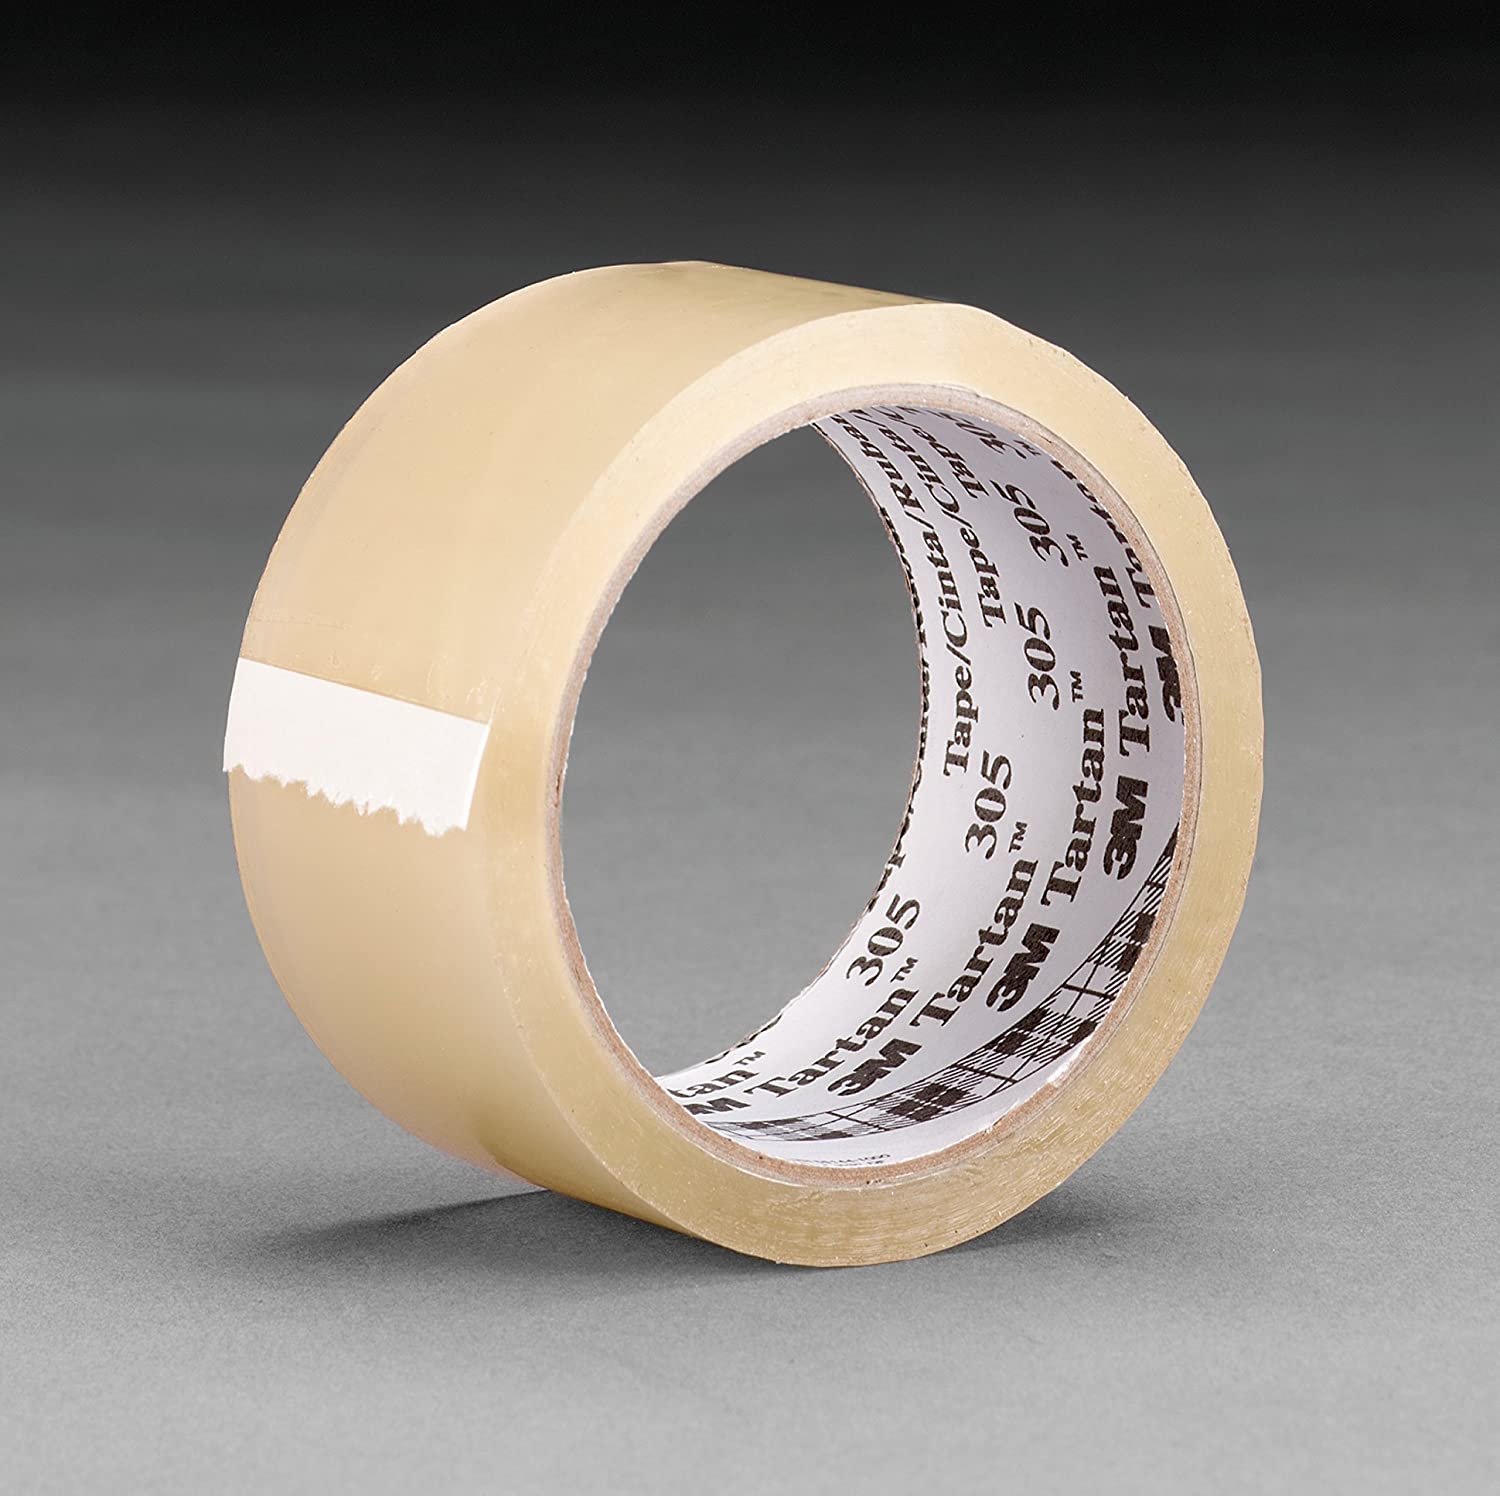 3M 200 Utility Purpose Paper Tape - 4 in x 180 ft Crepe Paper Masking Tape Roll Bonding Tapes, Natural